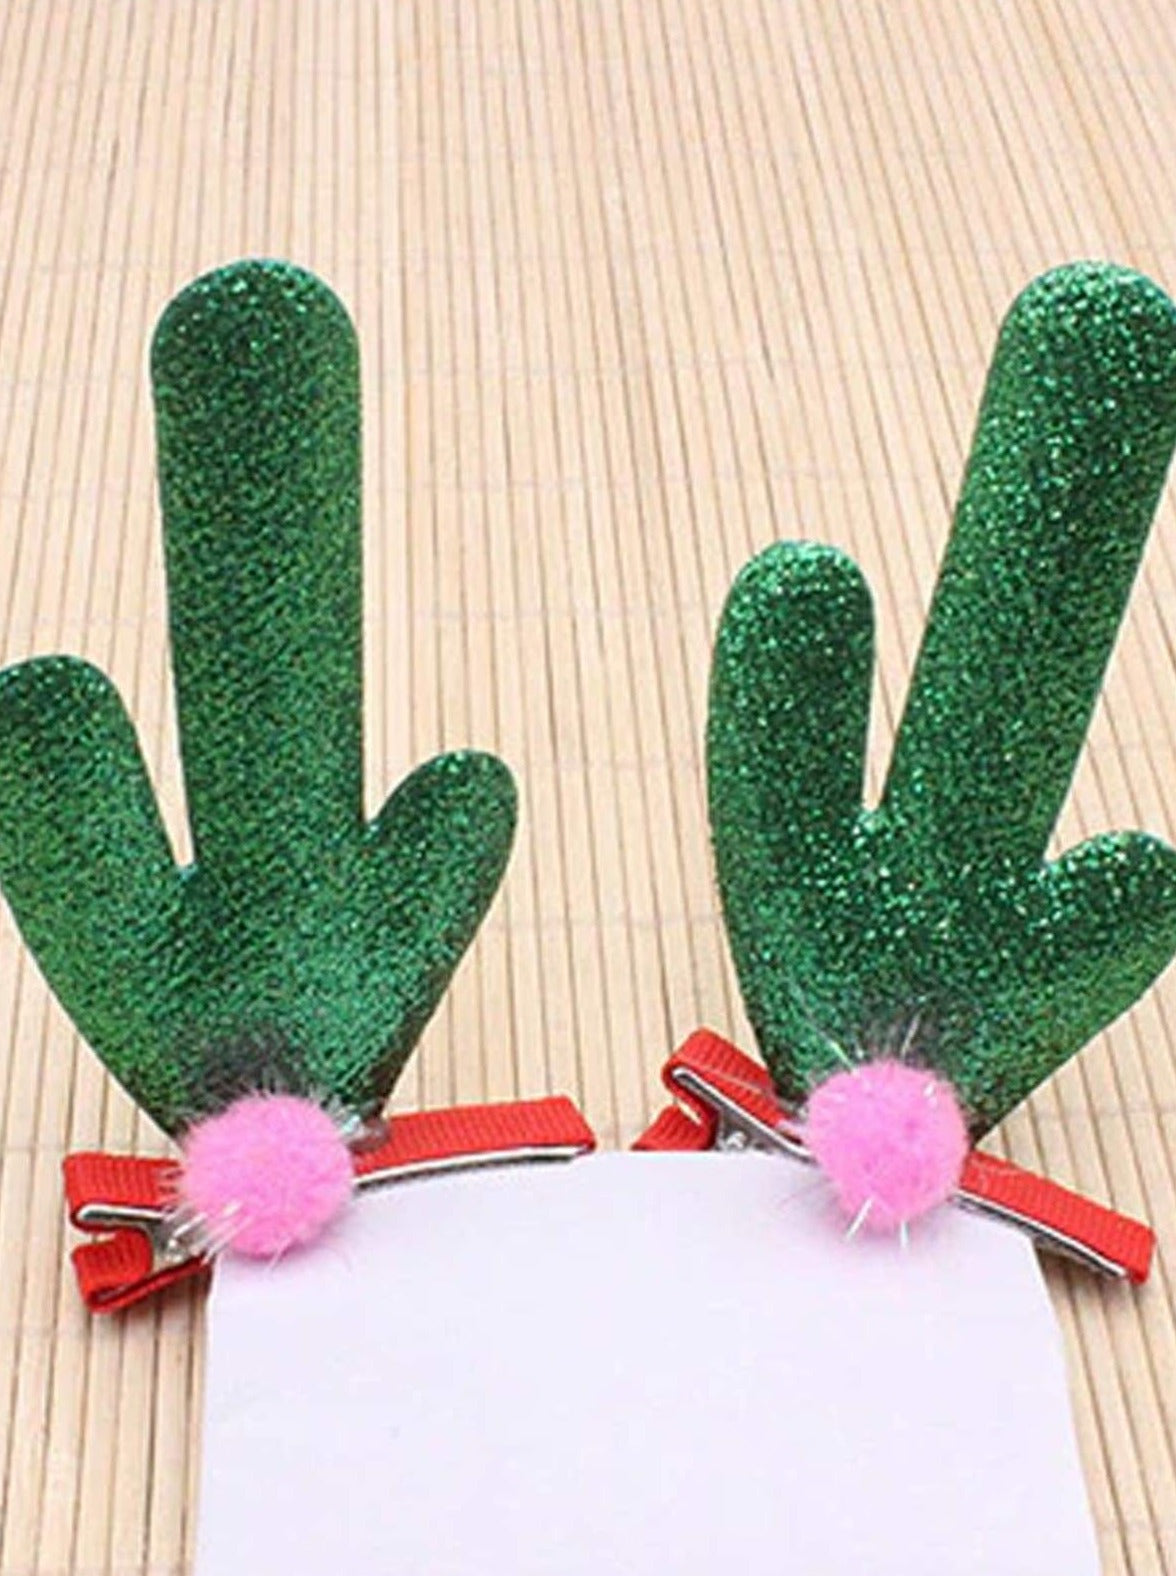 Girls Christmas/Holiday Hair Clips - Green Antlers - Hair Accessories